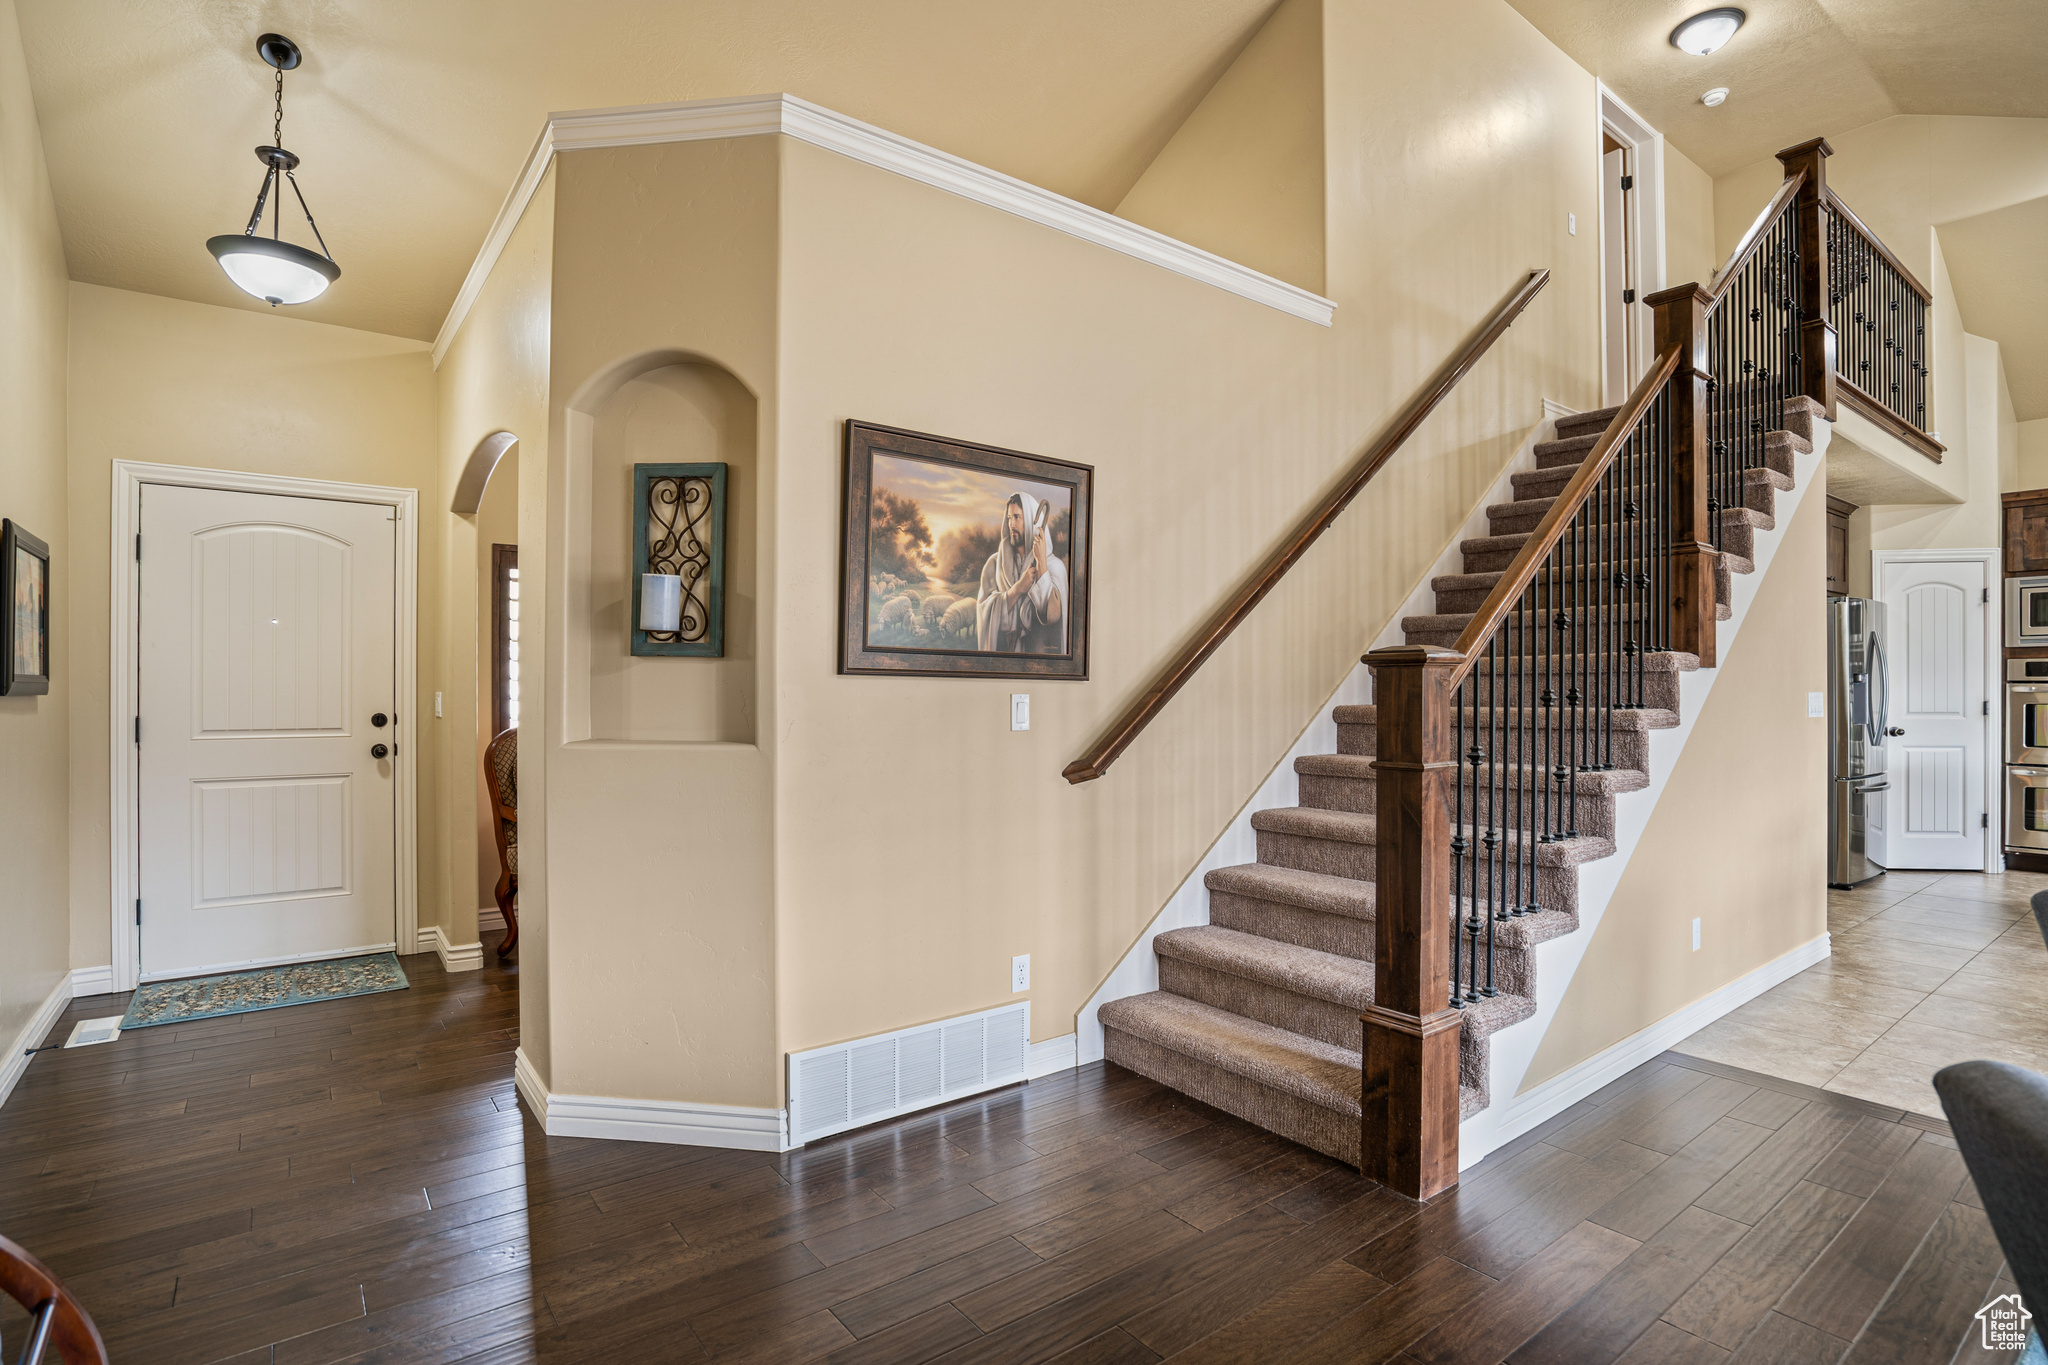 Foyer with a towering ceiling and tile floors